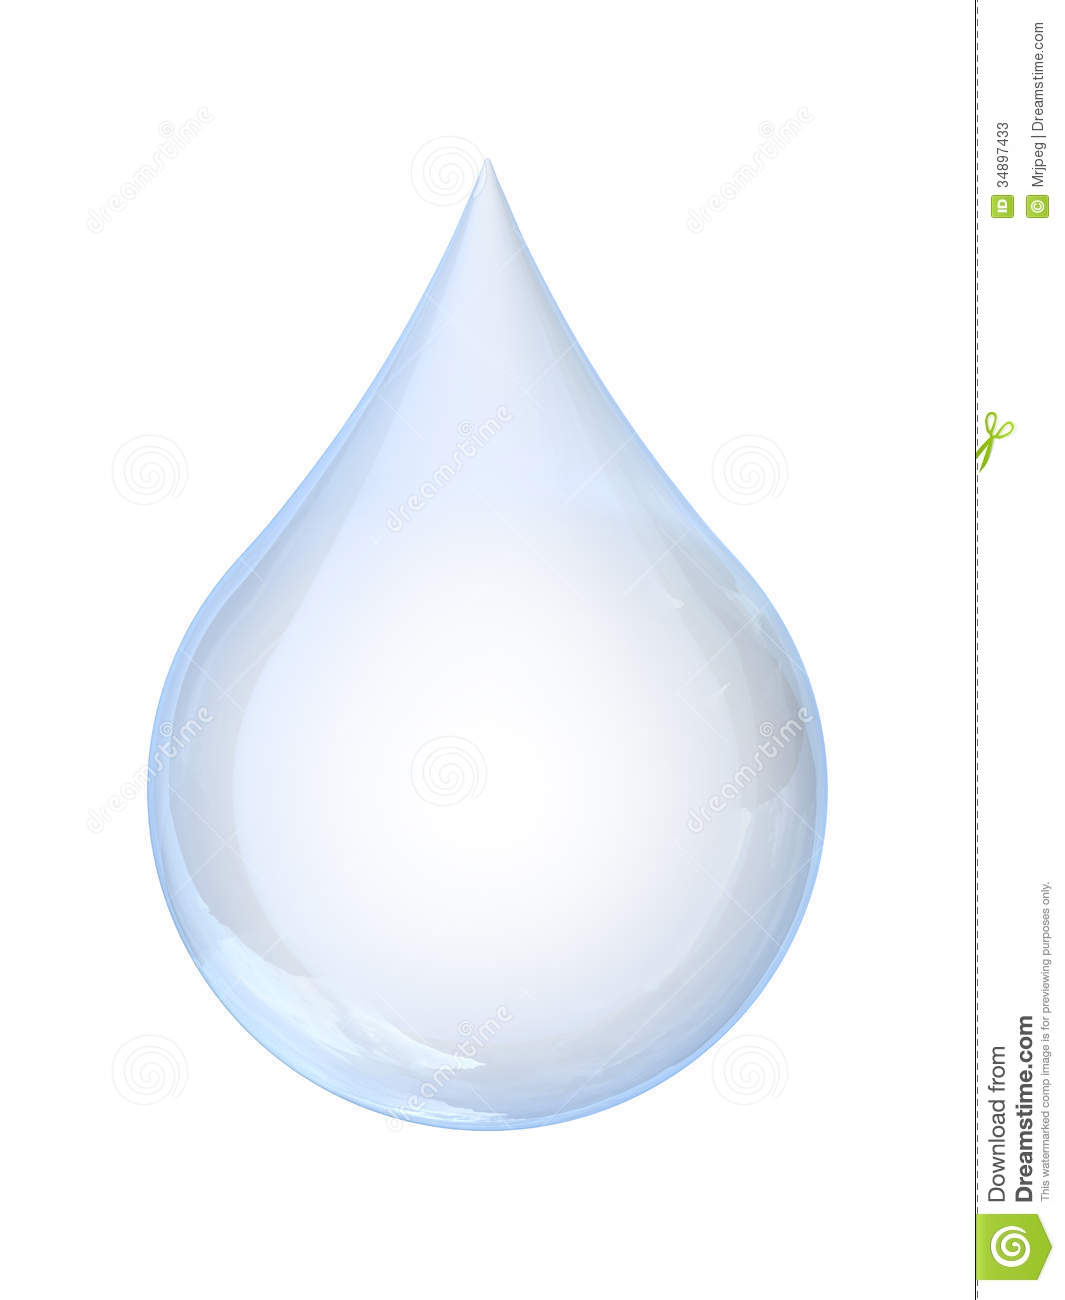 Water Droplet Drop Isolated White Background Clipping Path 34897433